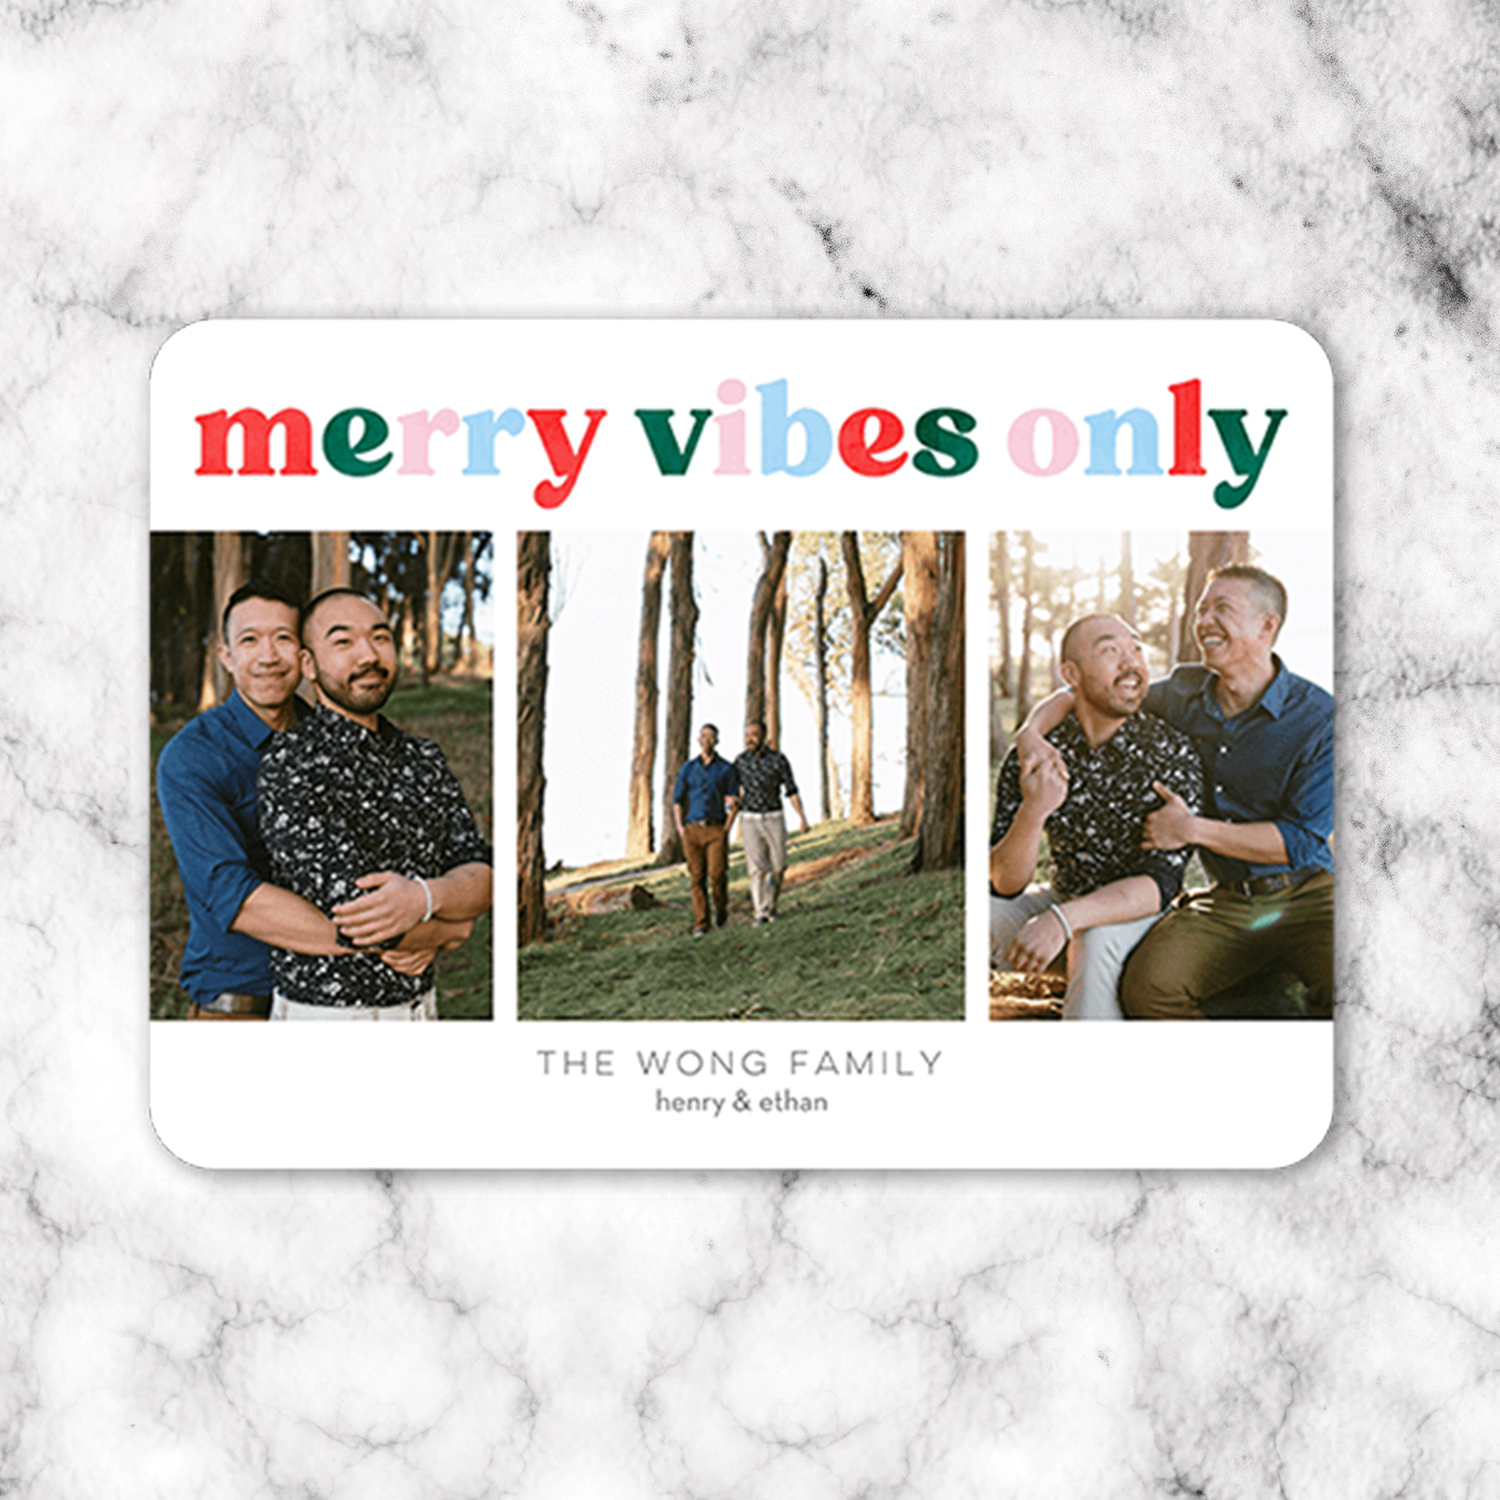 A holiday card that reads "merry vibes only"